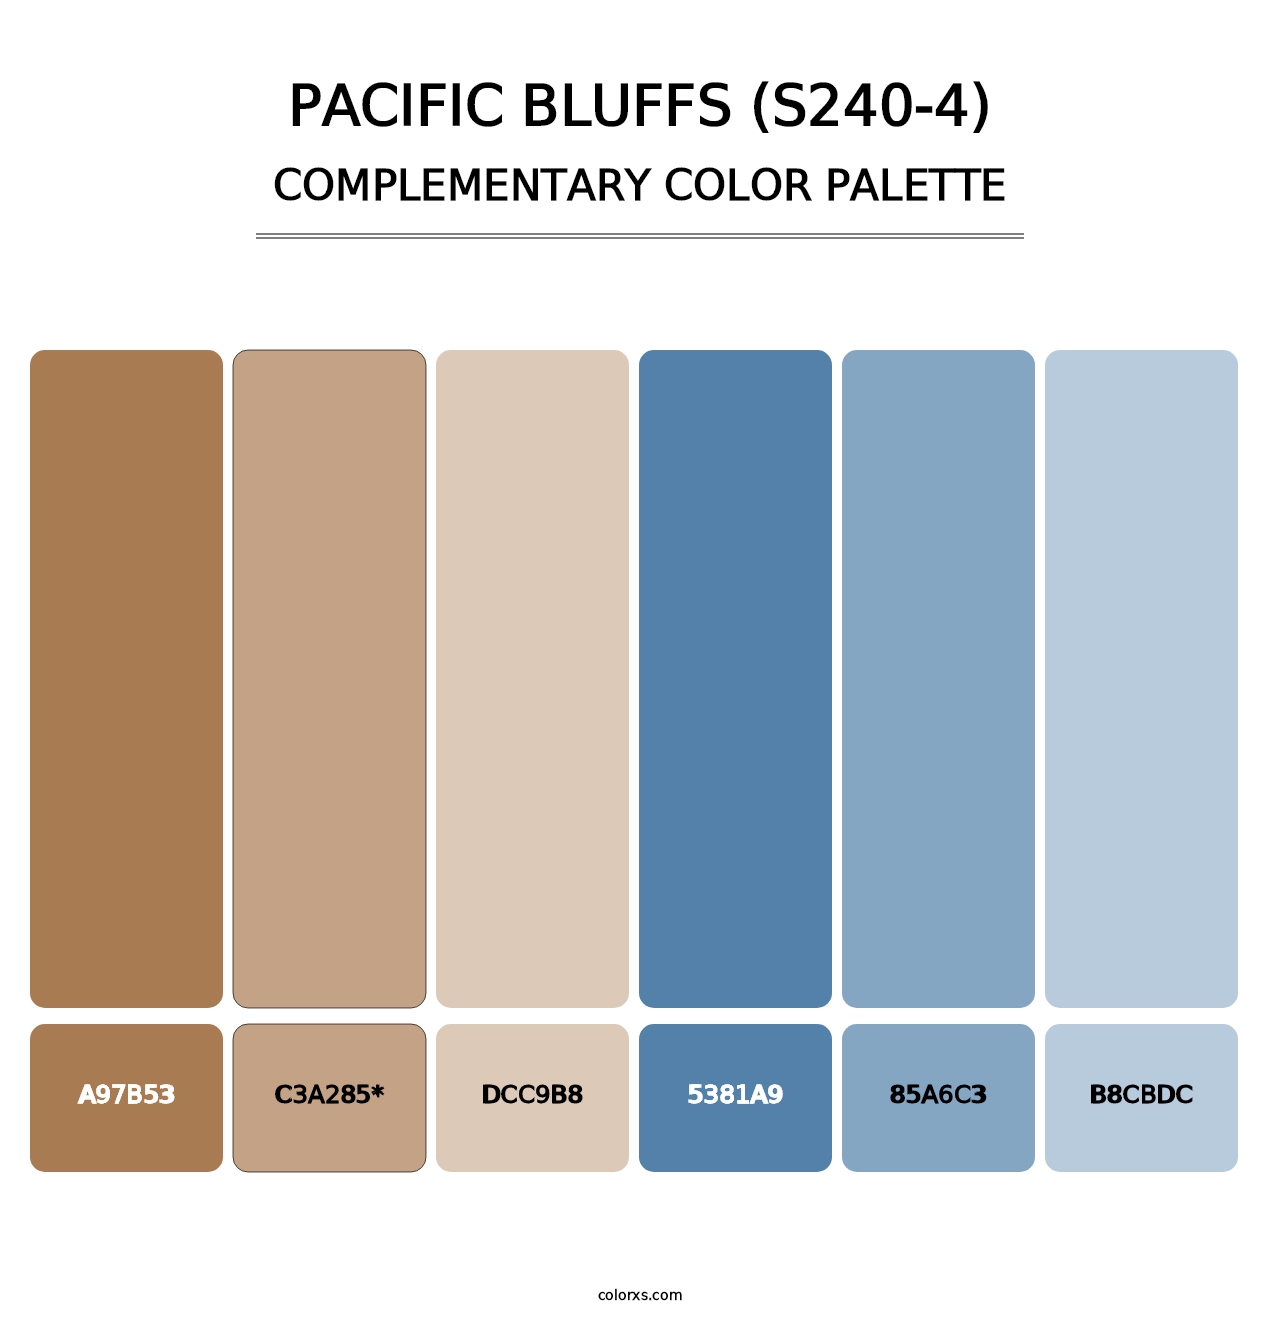 Pacific Bluffs (S240-4) - Complementary Color Palette